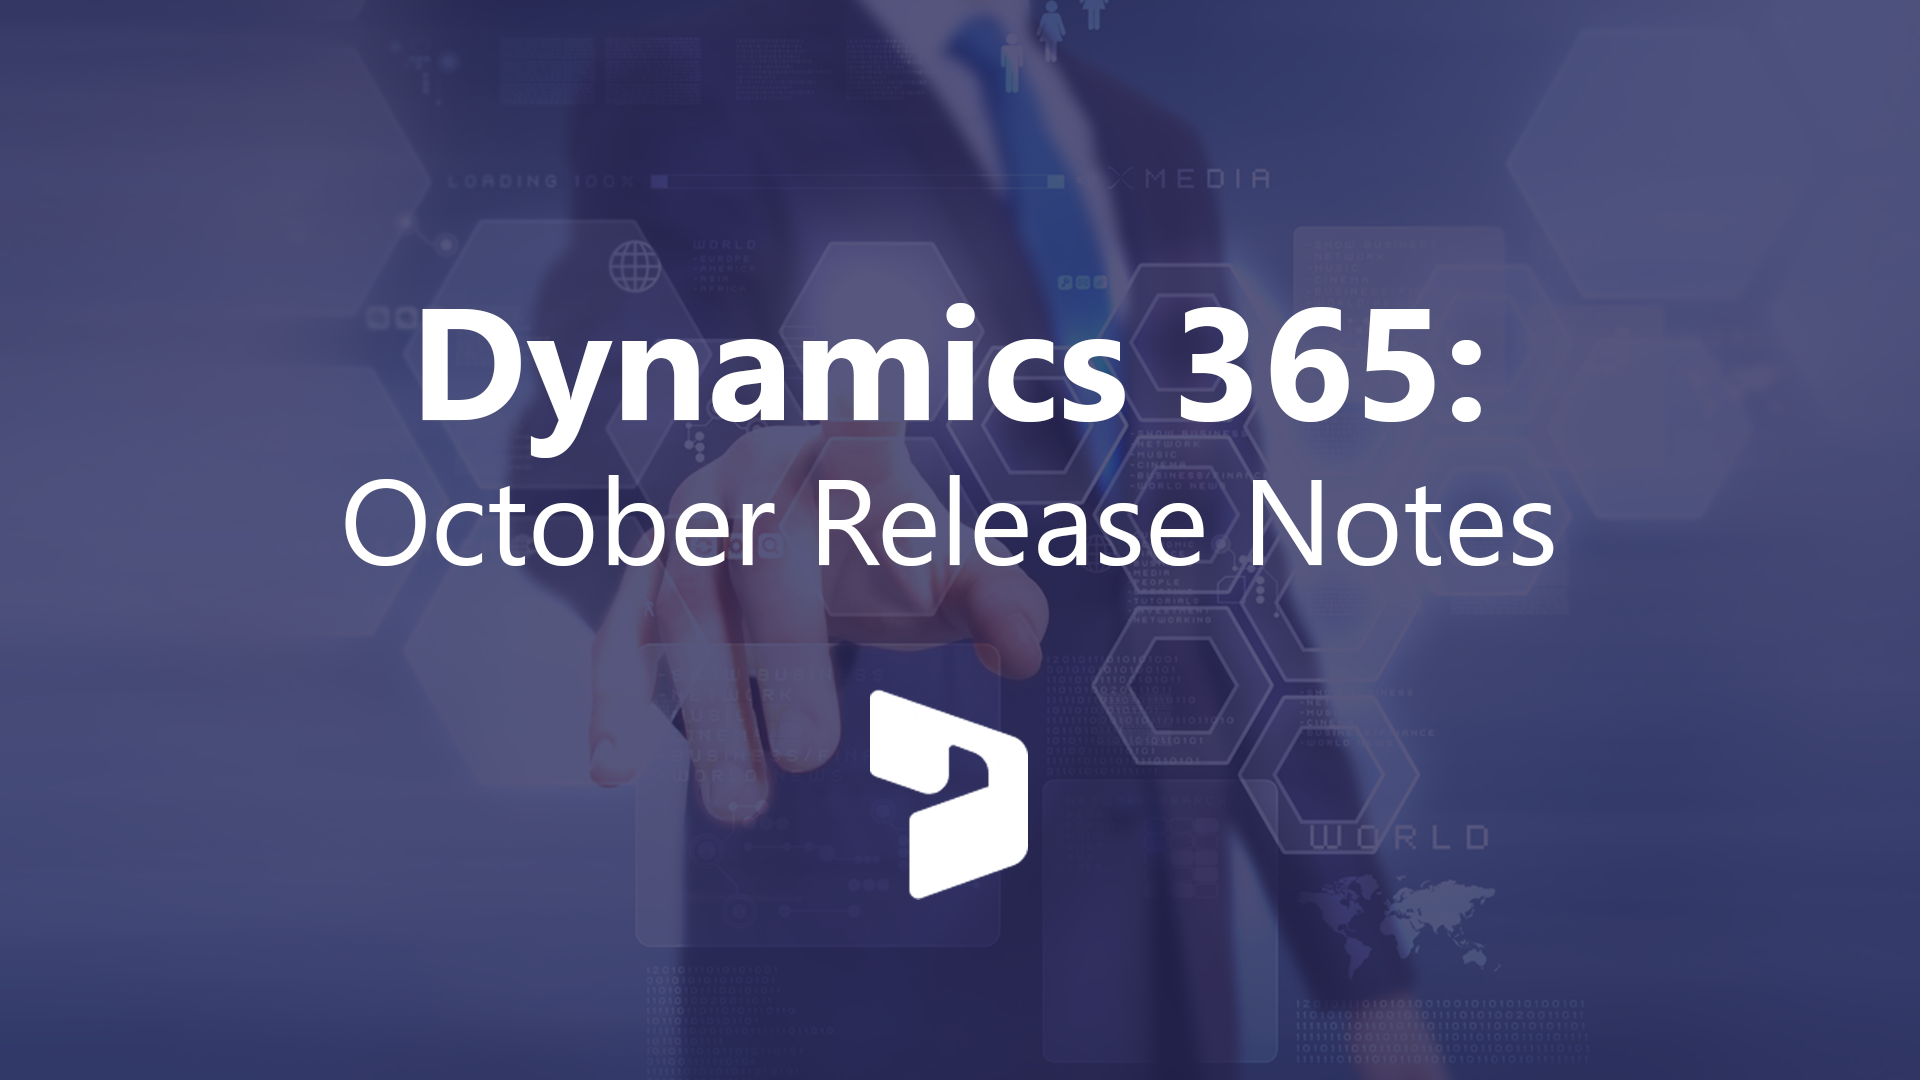 Dynamics 365 October release notes